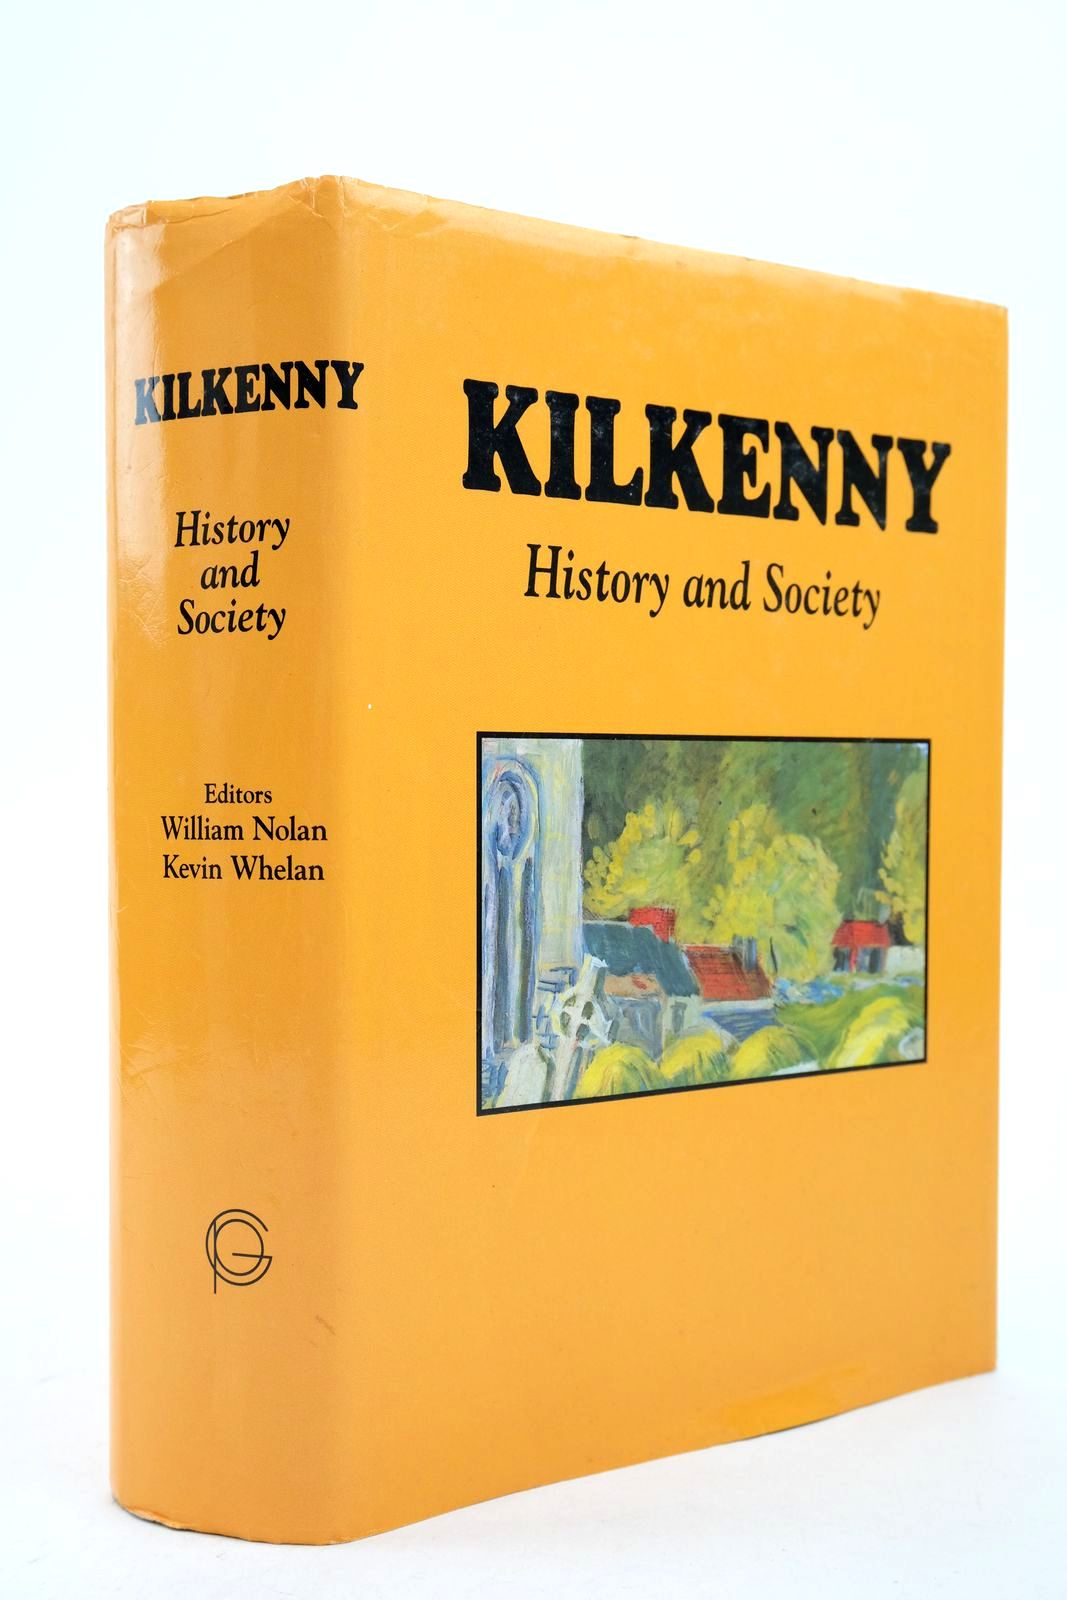 Photo of KILKENNY: HISTORY AND SOCIETY written by Nolan, William Whelan, Kevin published by Geography Publications (STOCK CODE: 2140531)  for sale by Stella & Rose's Books